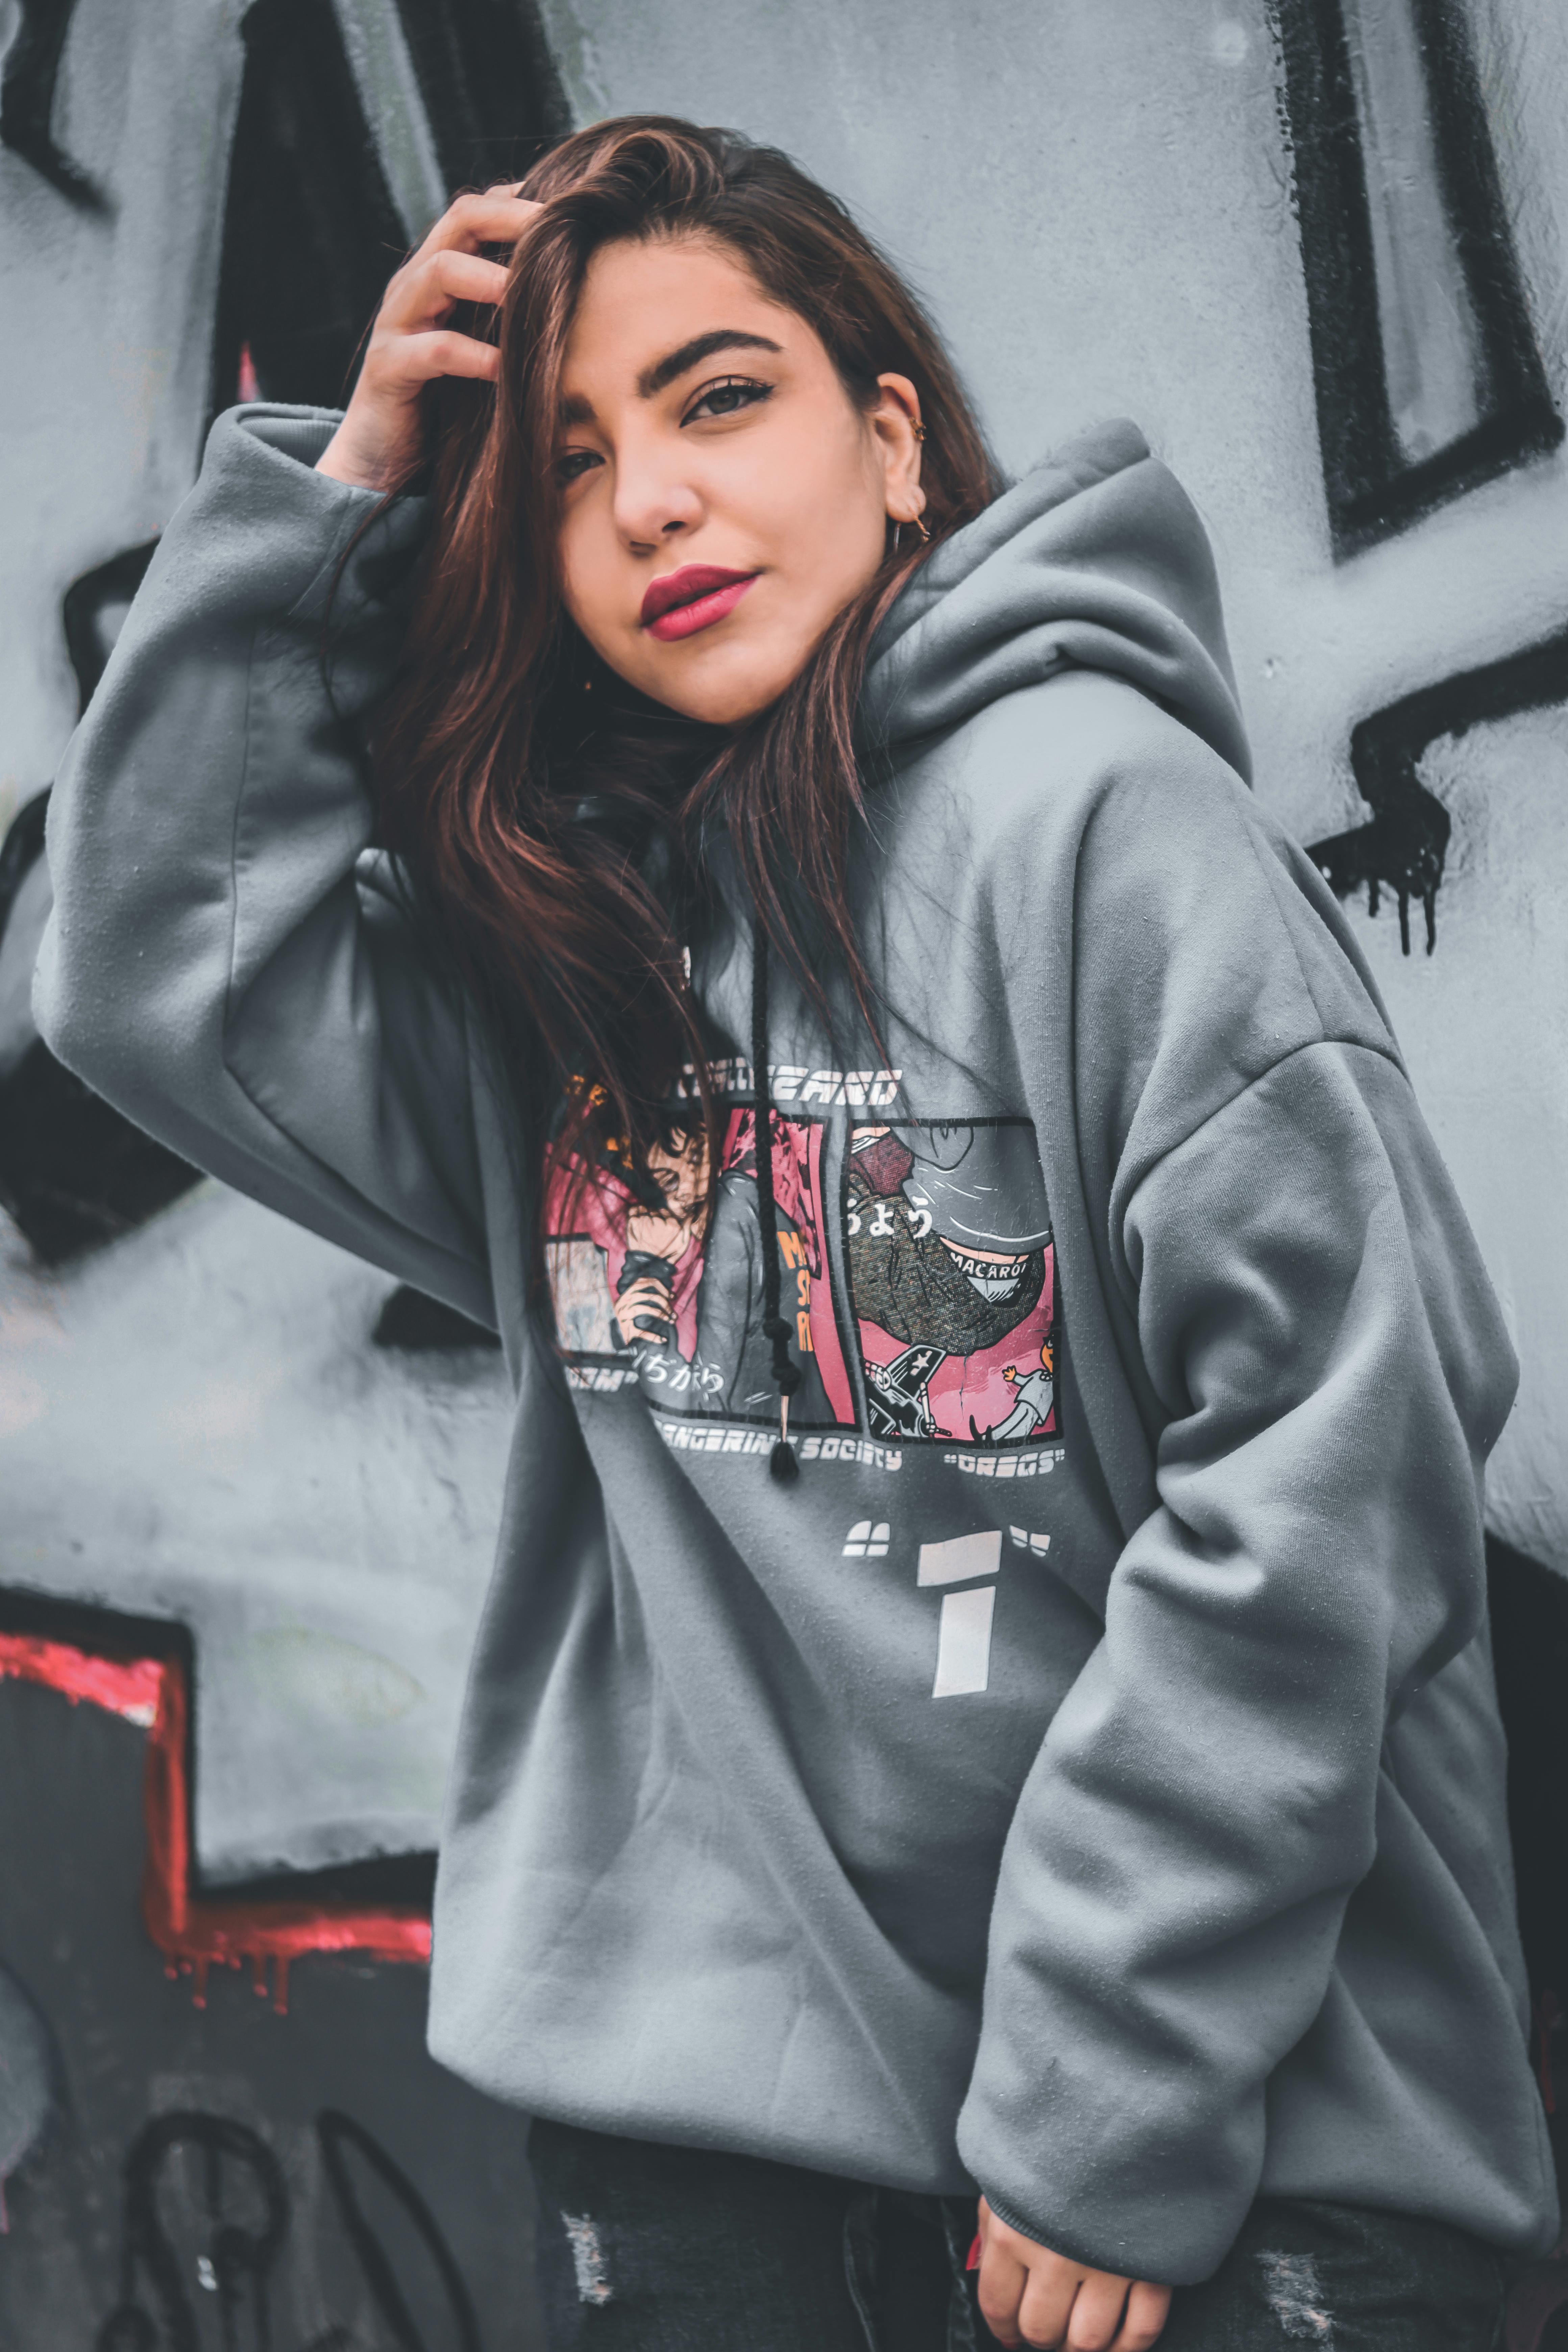 Unisex Hoodies Archives - Powered By Faith